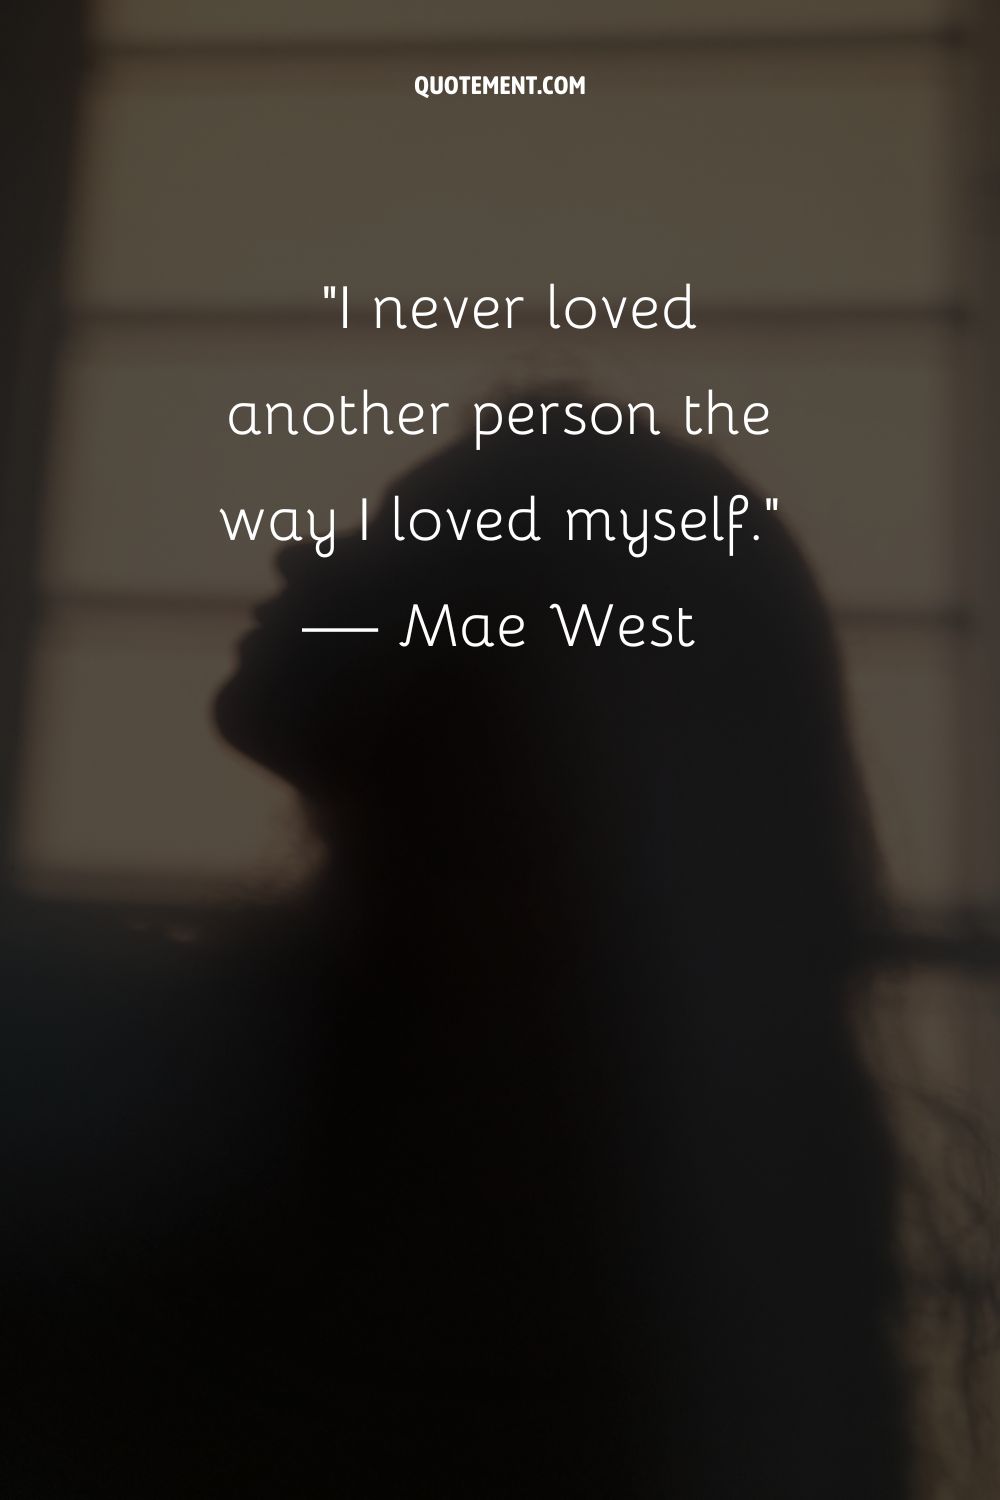 I never loved another person the way I loved myself.